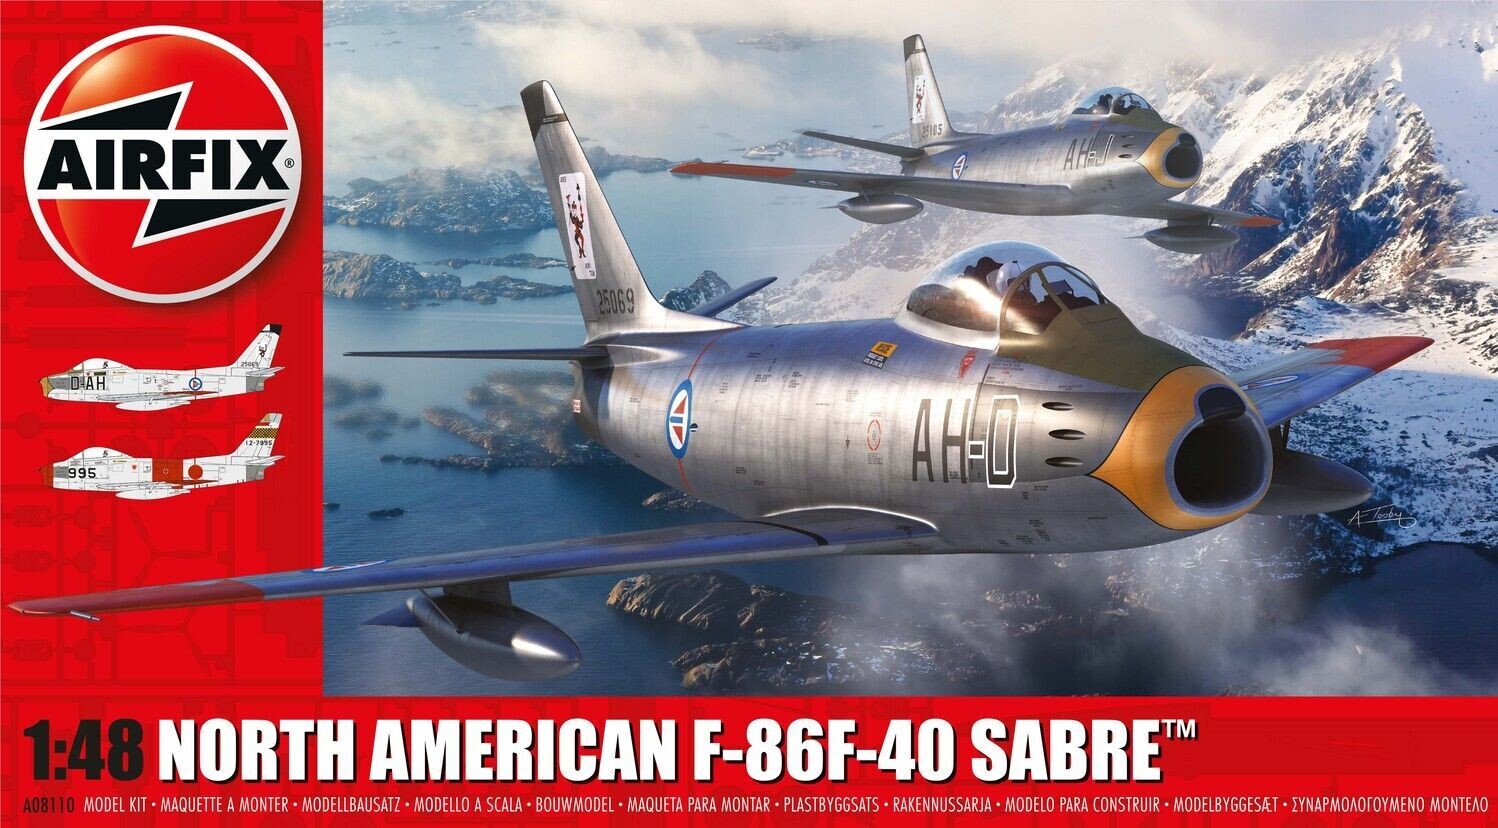 Airfix A08110 North American F-86F-40 Sabre 1:48 Scale Plastic Model Kit